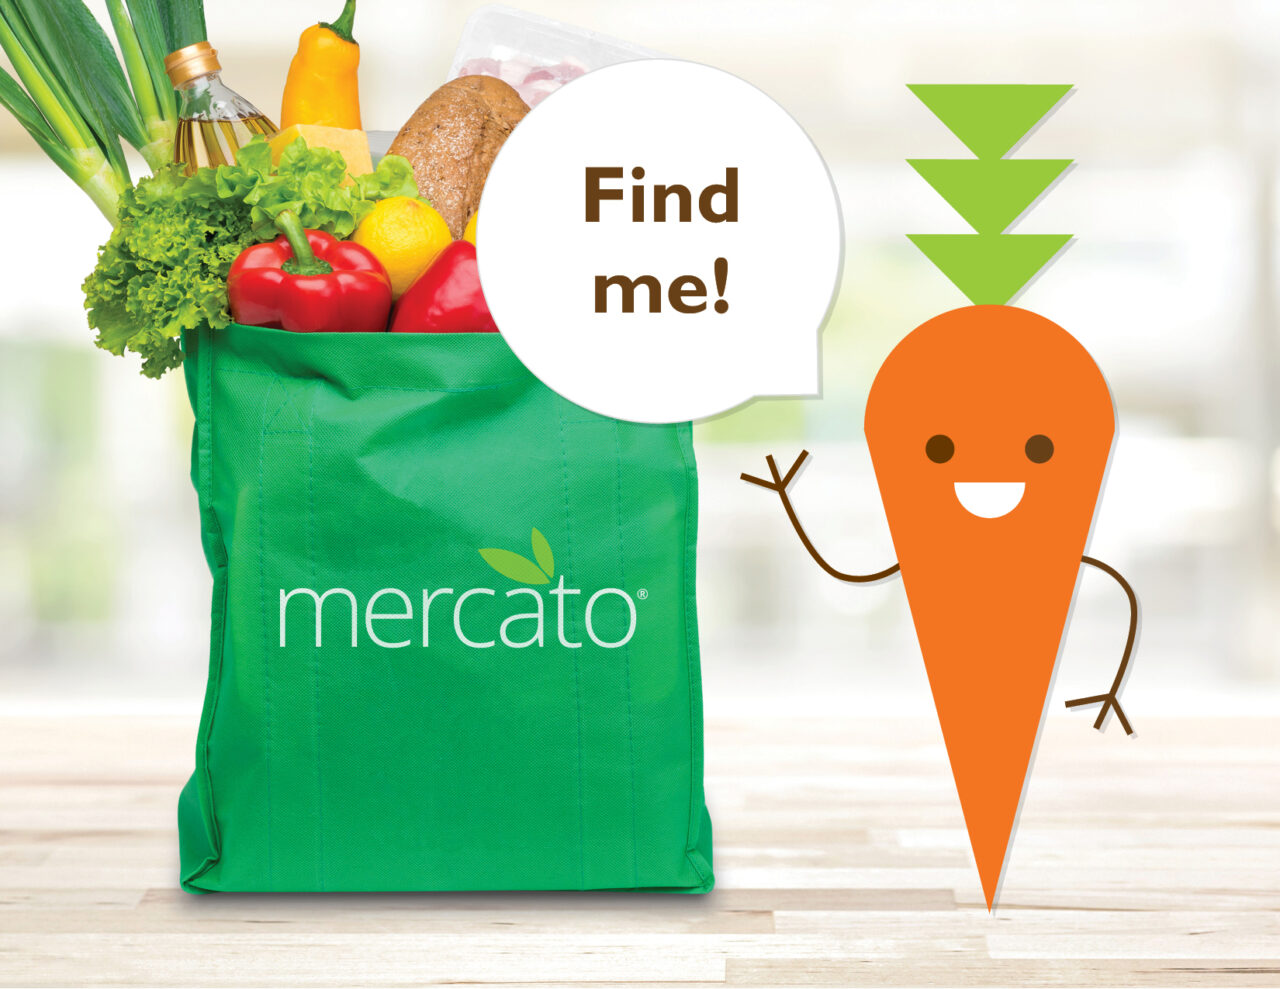 A carrot character named Crunchy with a word bubble that says, "Find me!" next to a shopping bag full of groceries that has a logo for Mercato